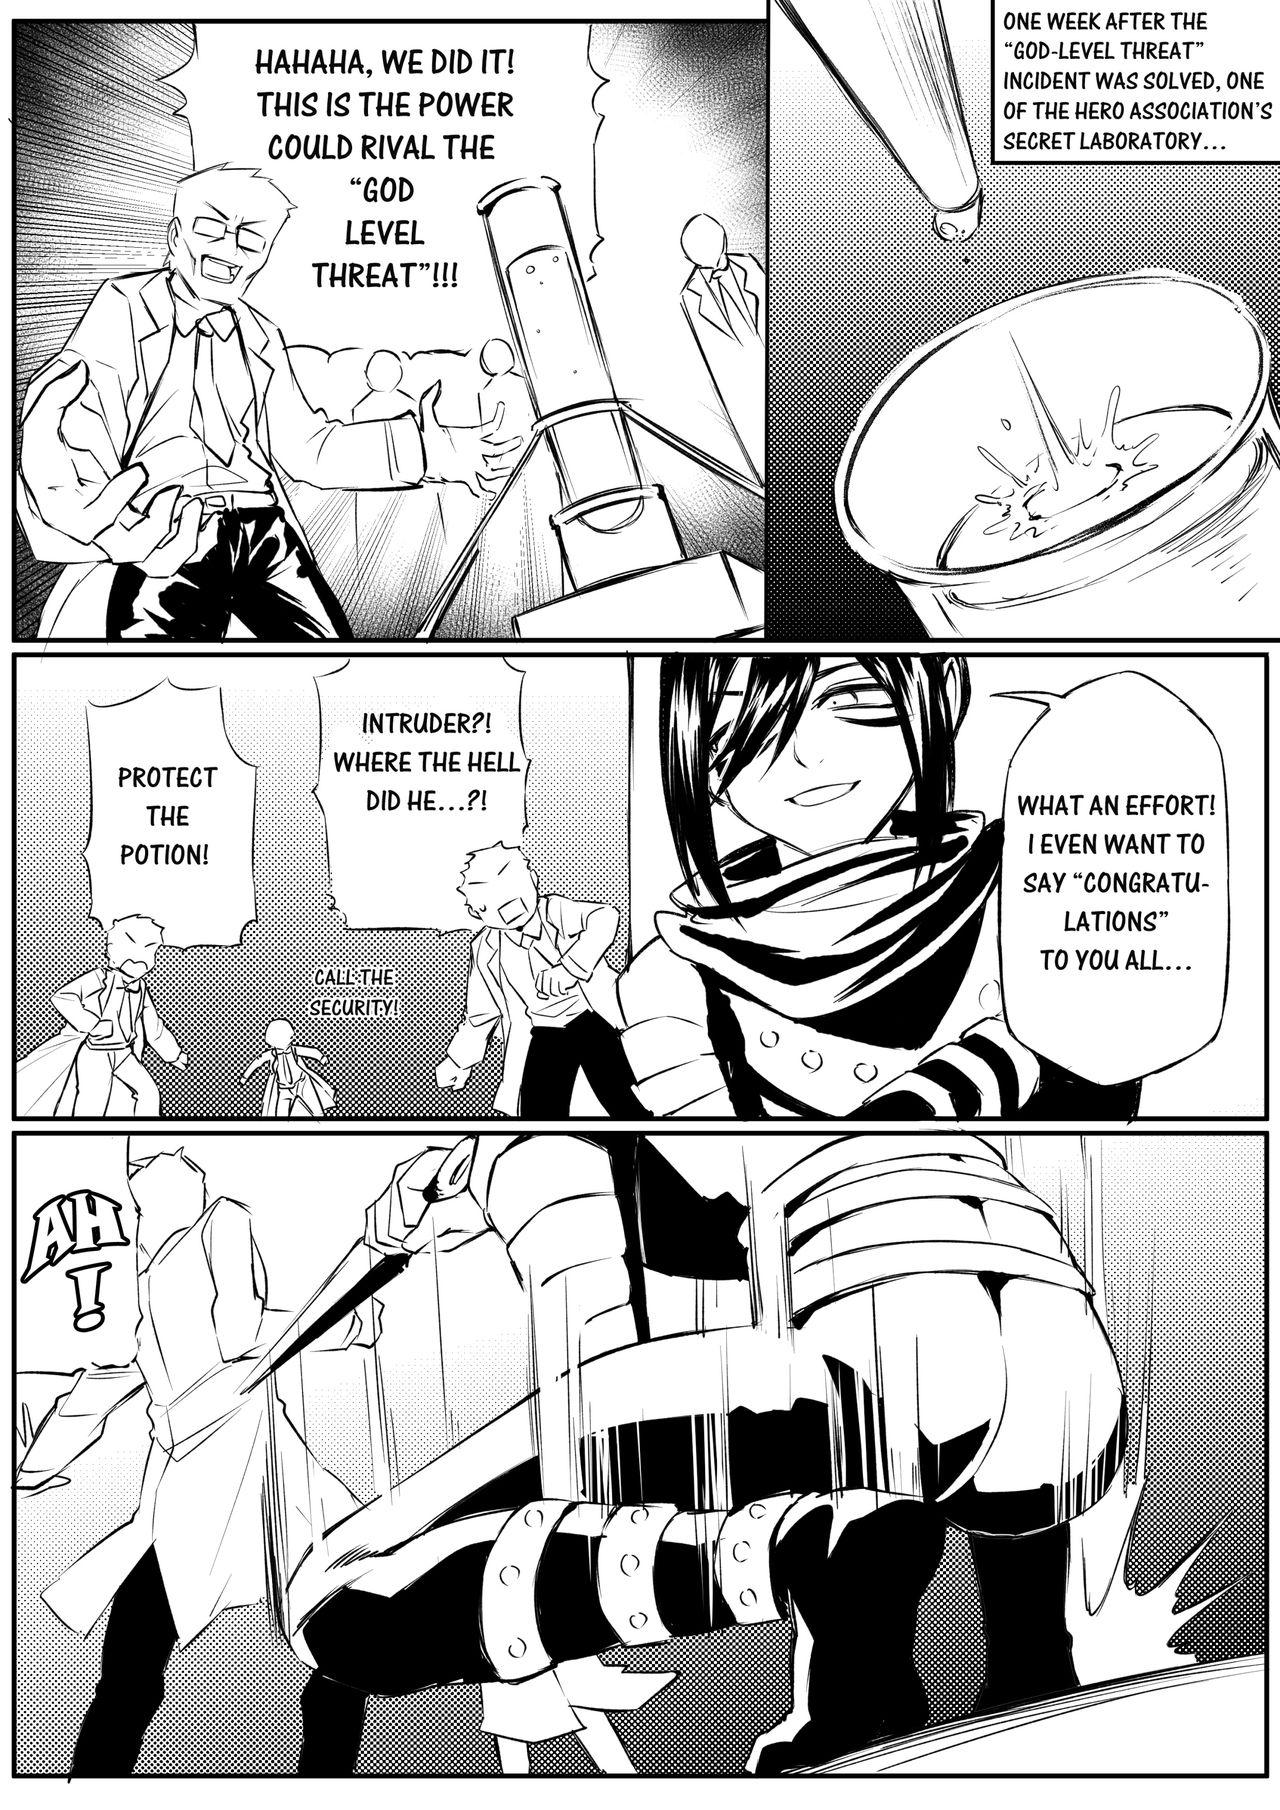 Beard Attack on Sonico - One punch man Oralsex - Page 2